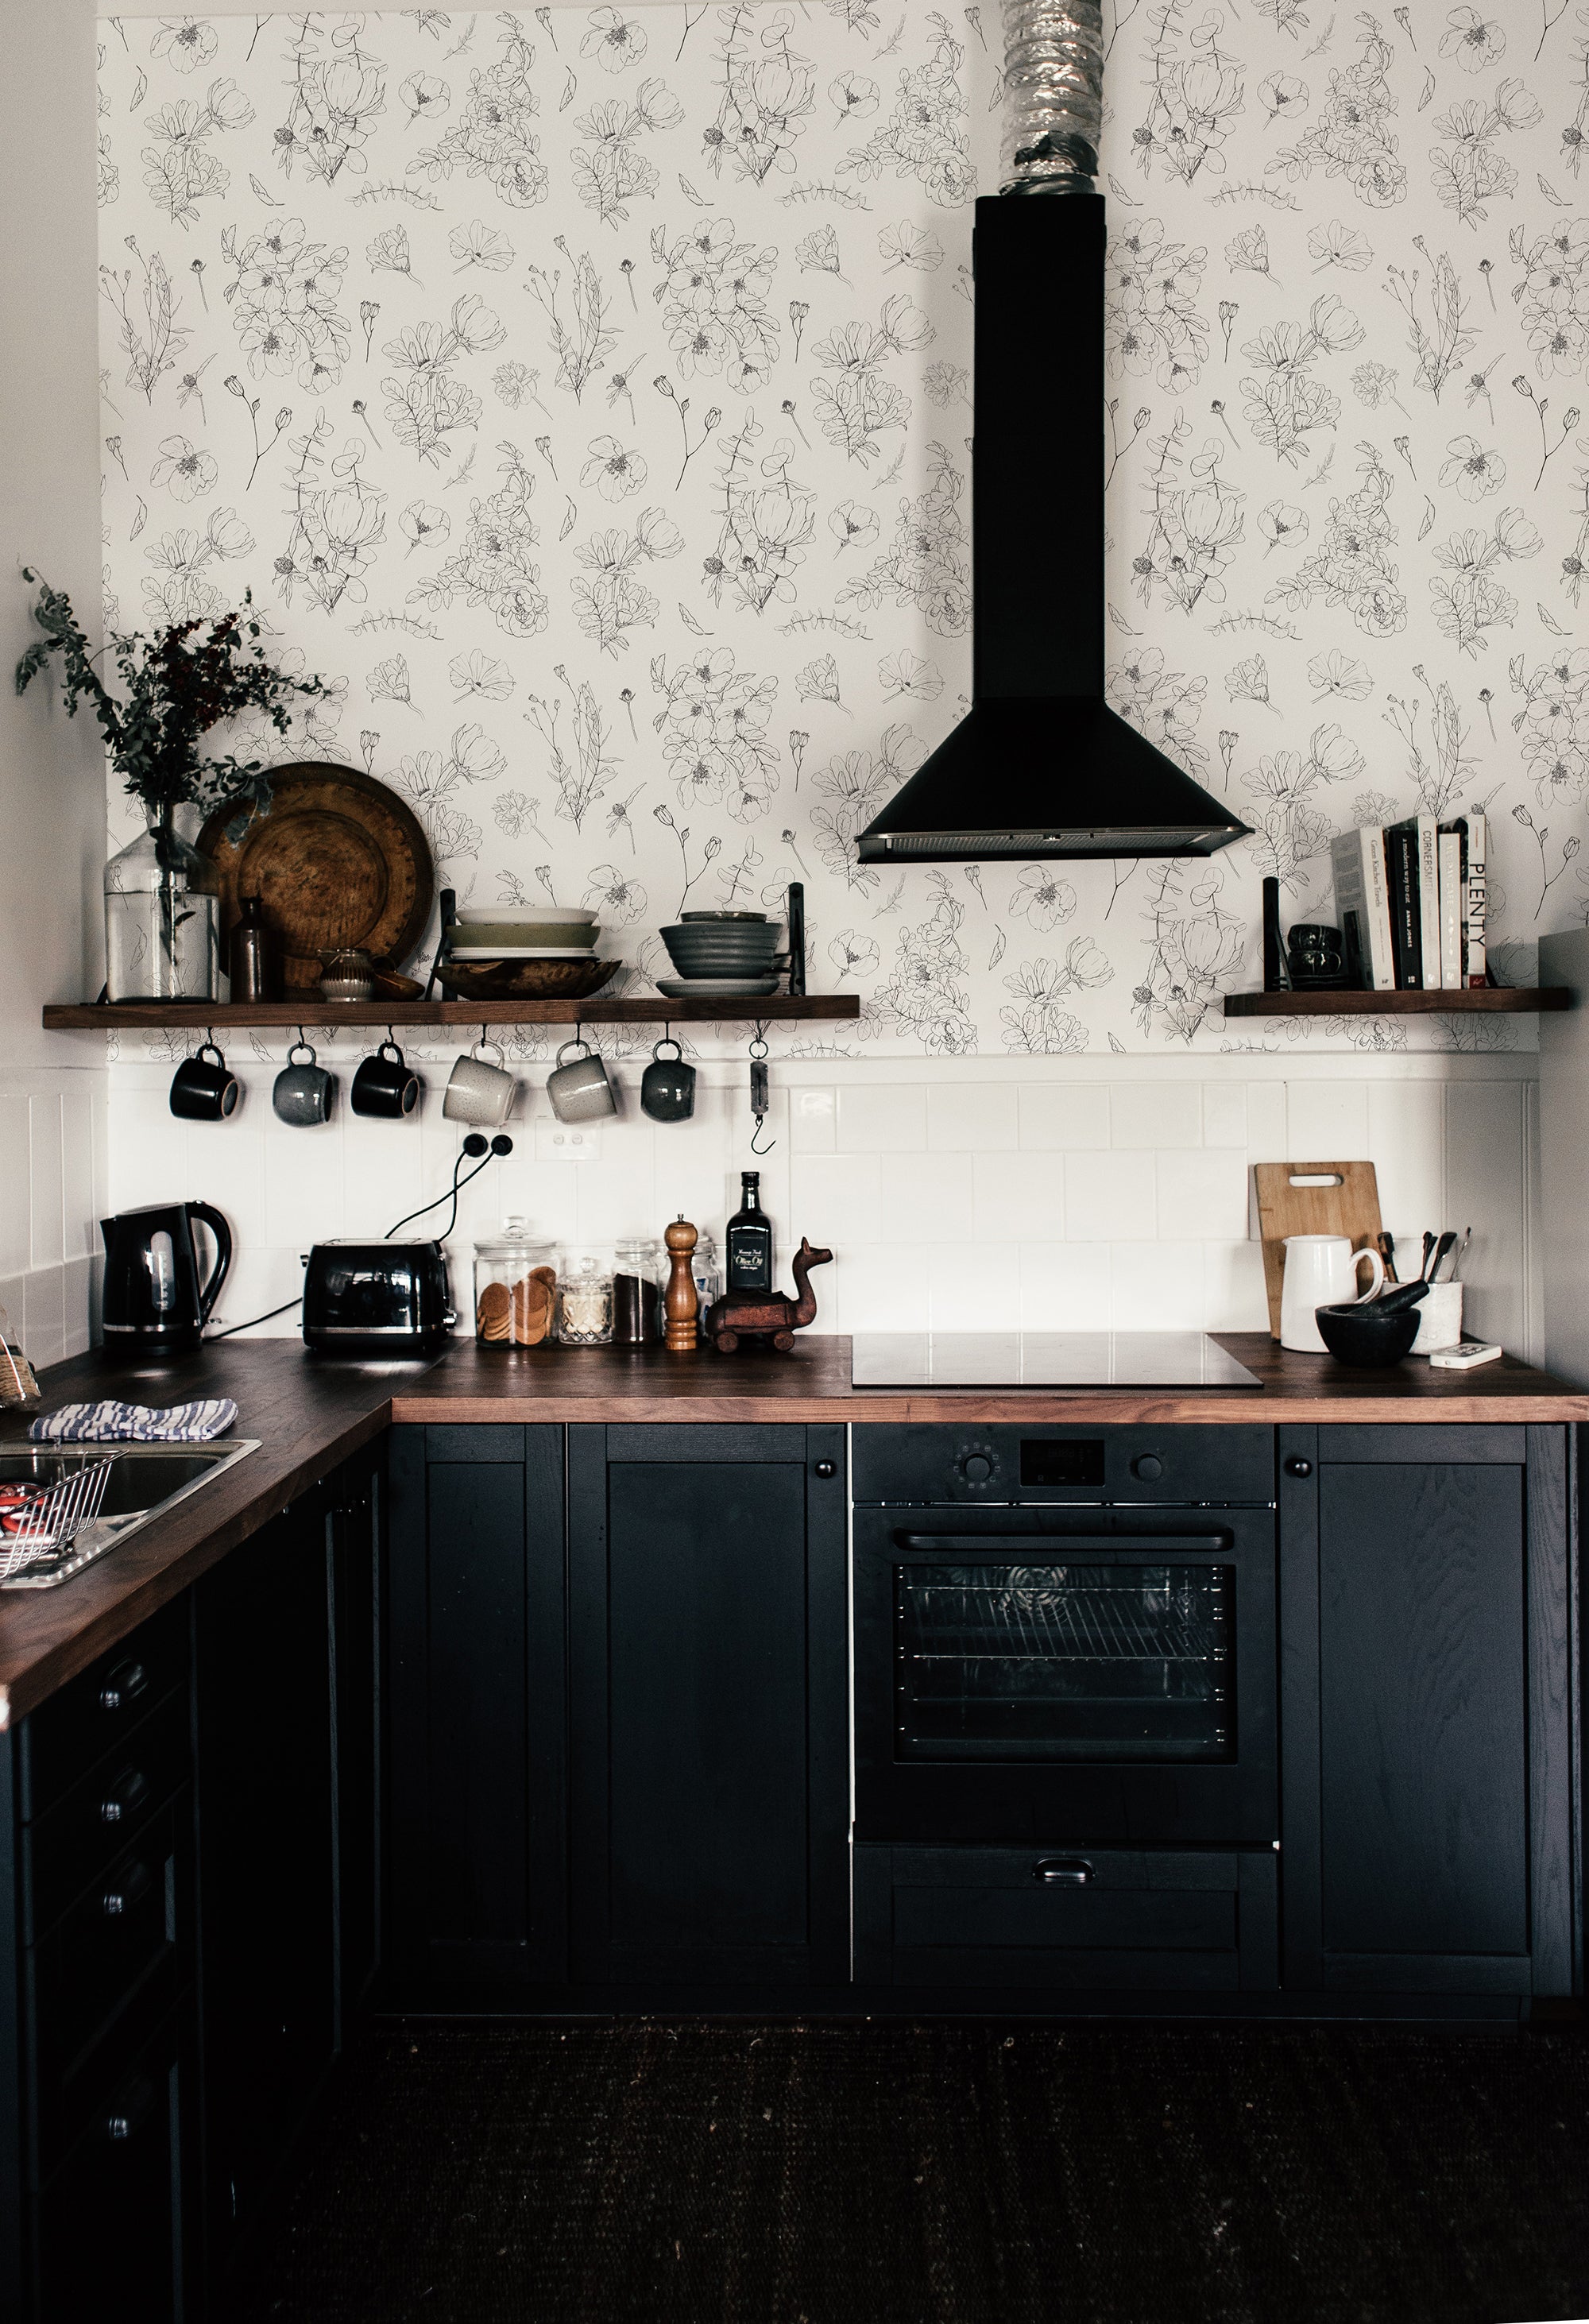 A stylish kitchen interior with dark wooden cabinets and a matching countertop, featuring a white subway tile backsplash and a wall adorned with 'Wildflower Sketch Wallpaper,' which displays a monochromatic floral pattern of various wildflowers and leaves in a hand-drawn style.